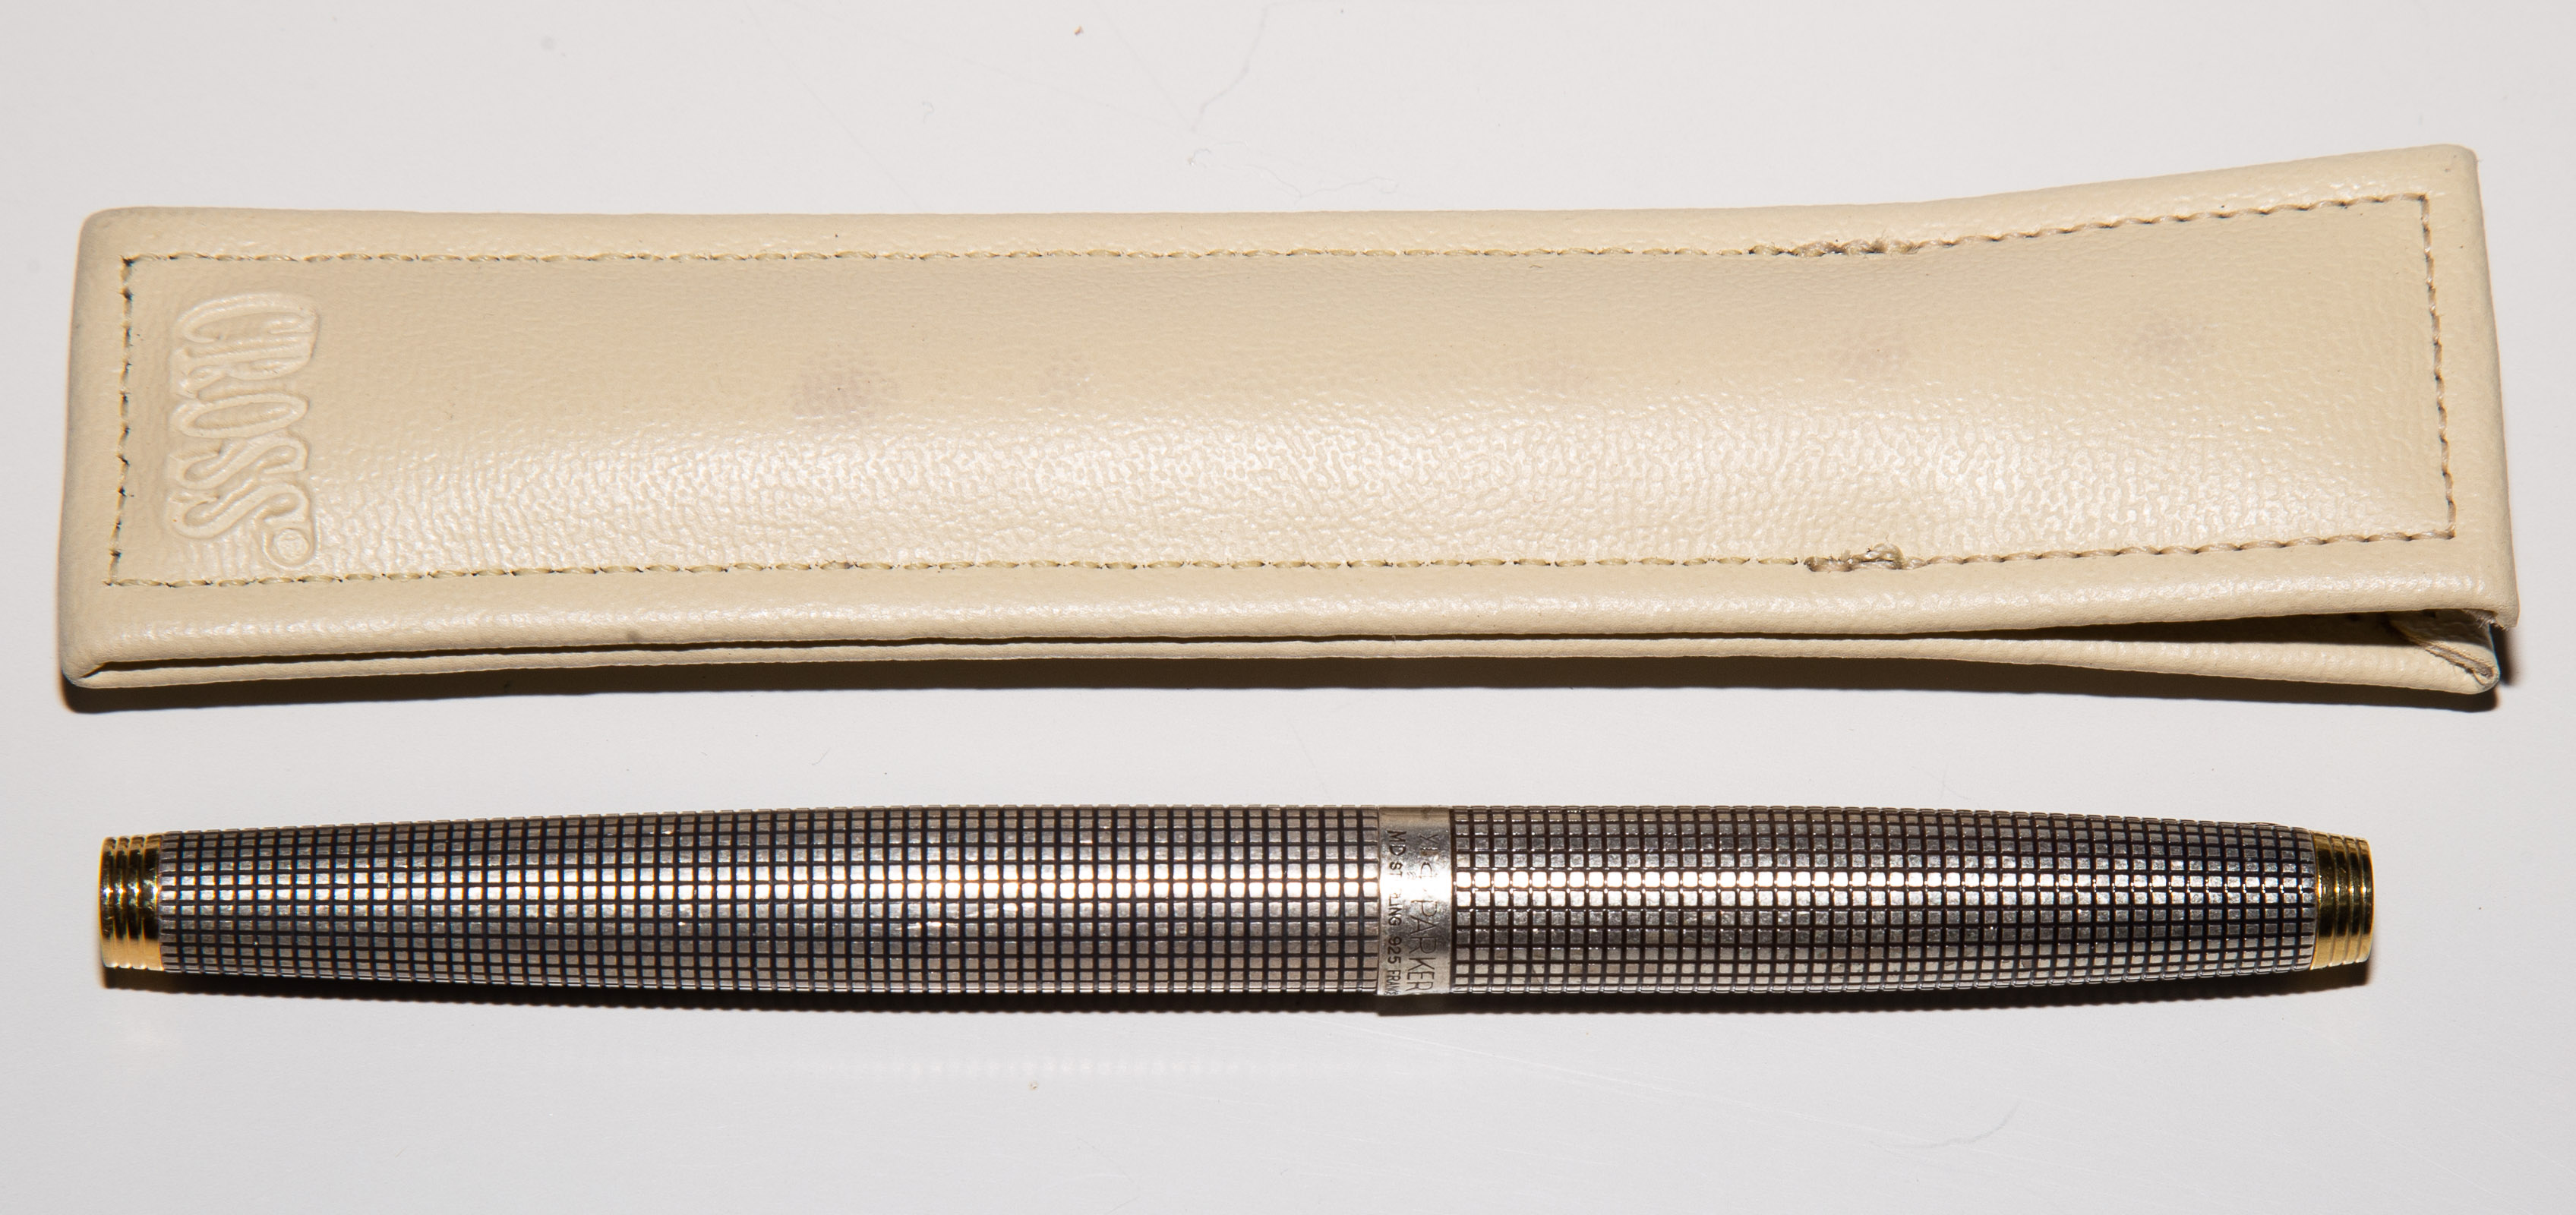 PARKER STERLING FOUNTAIN PEN WITH 337d44